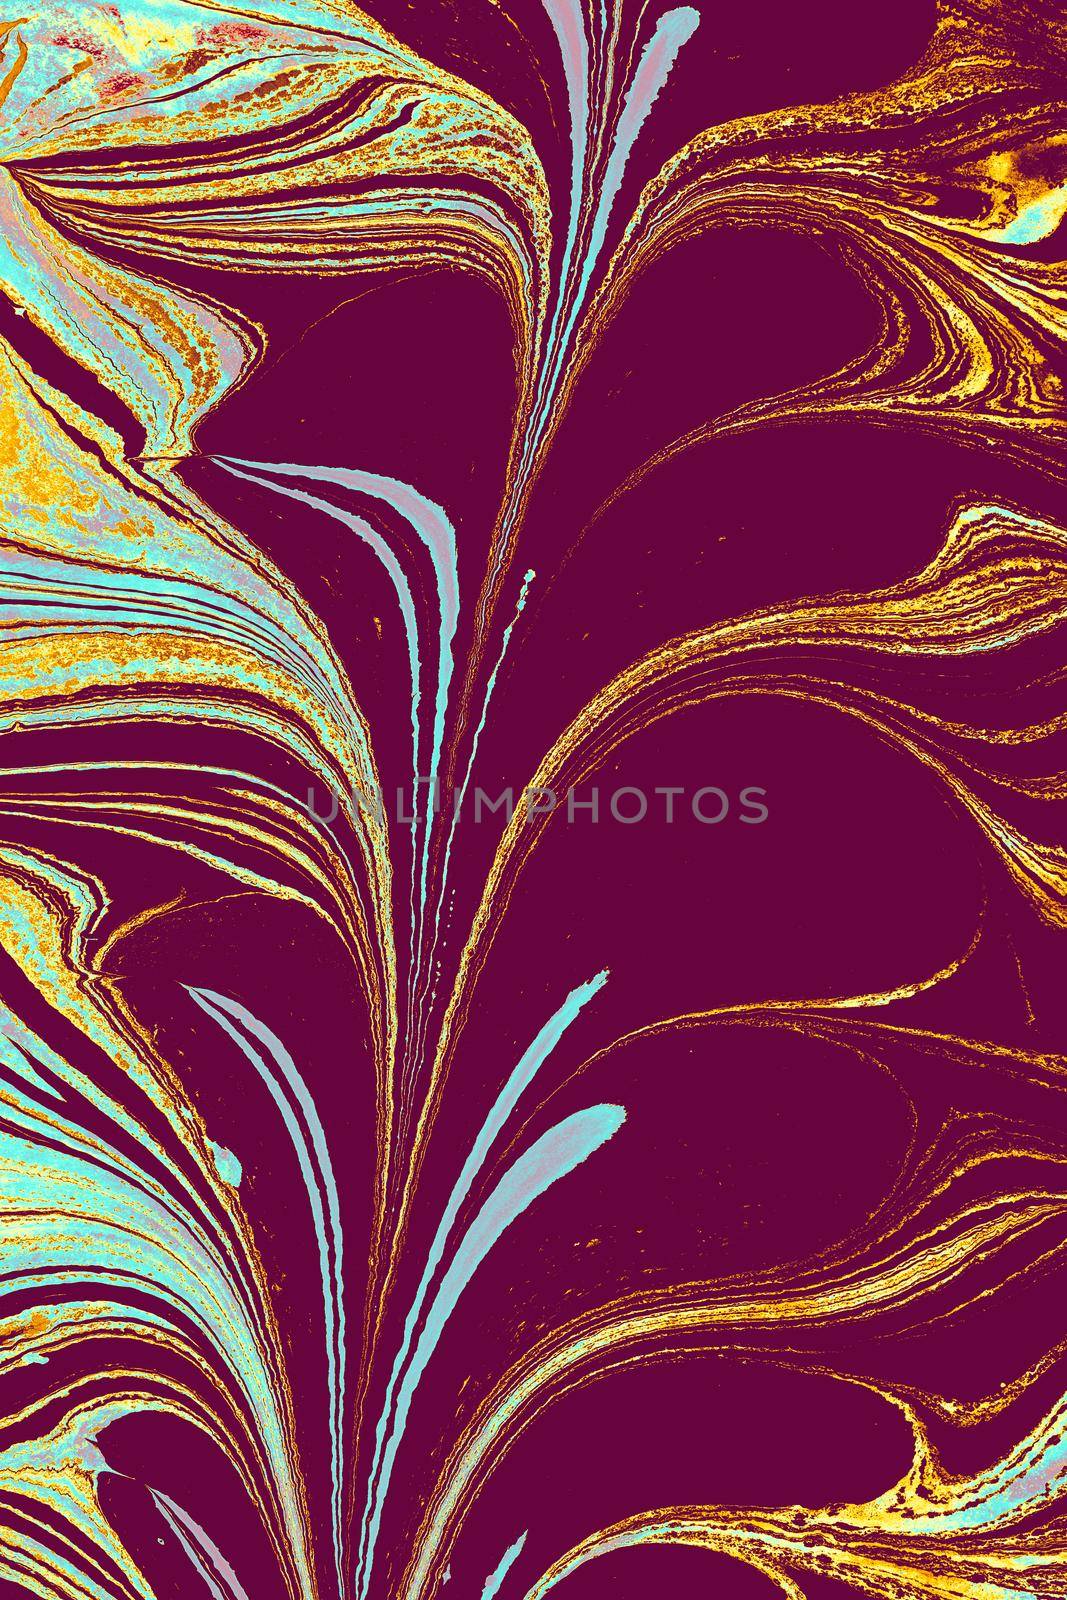 Abstract marble floral pattern texture. Traditional art of Ebru marbling
 by berkay